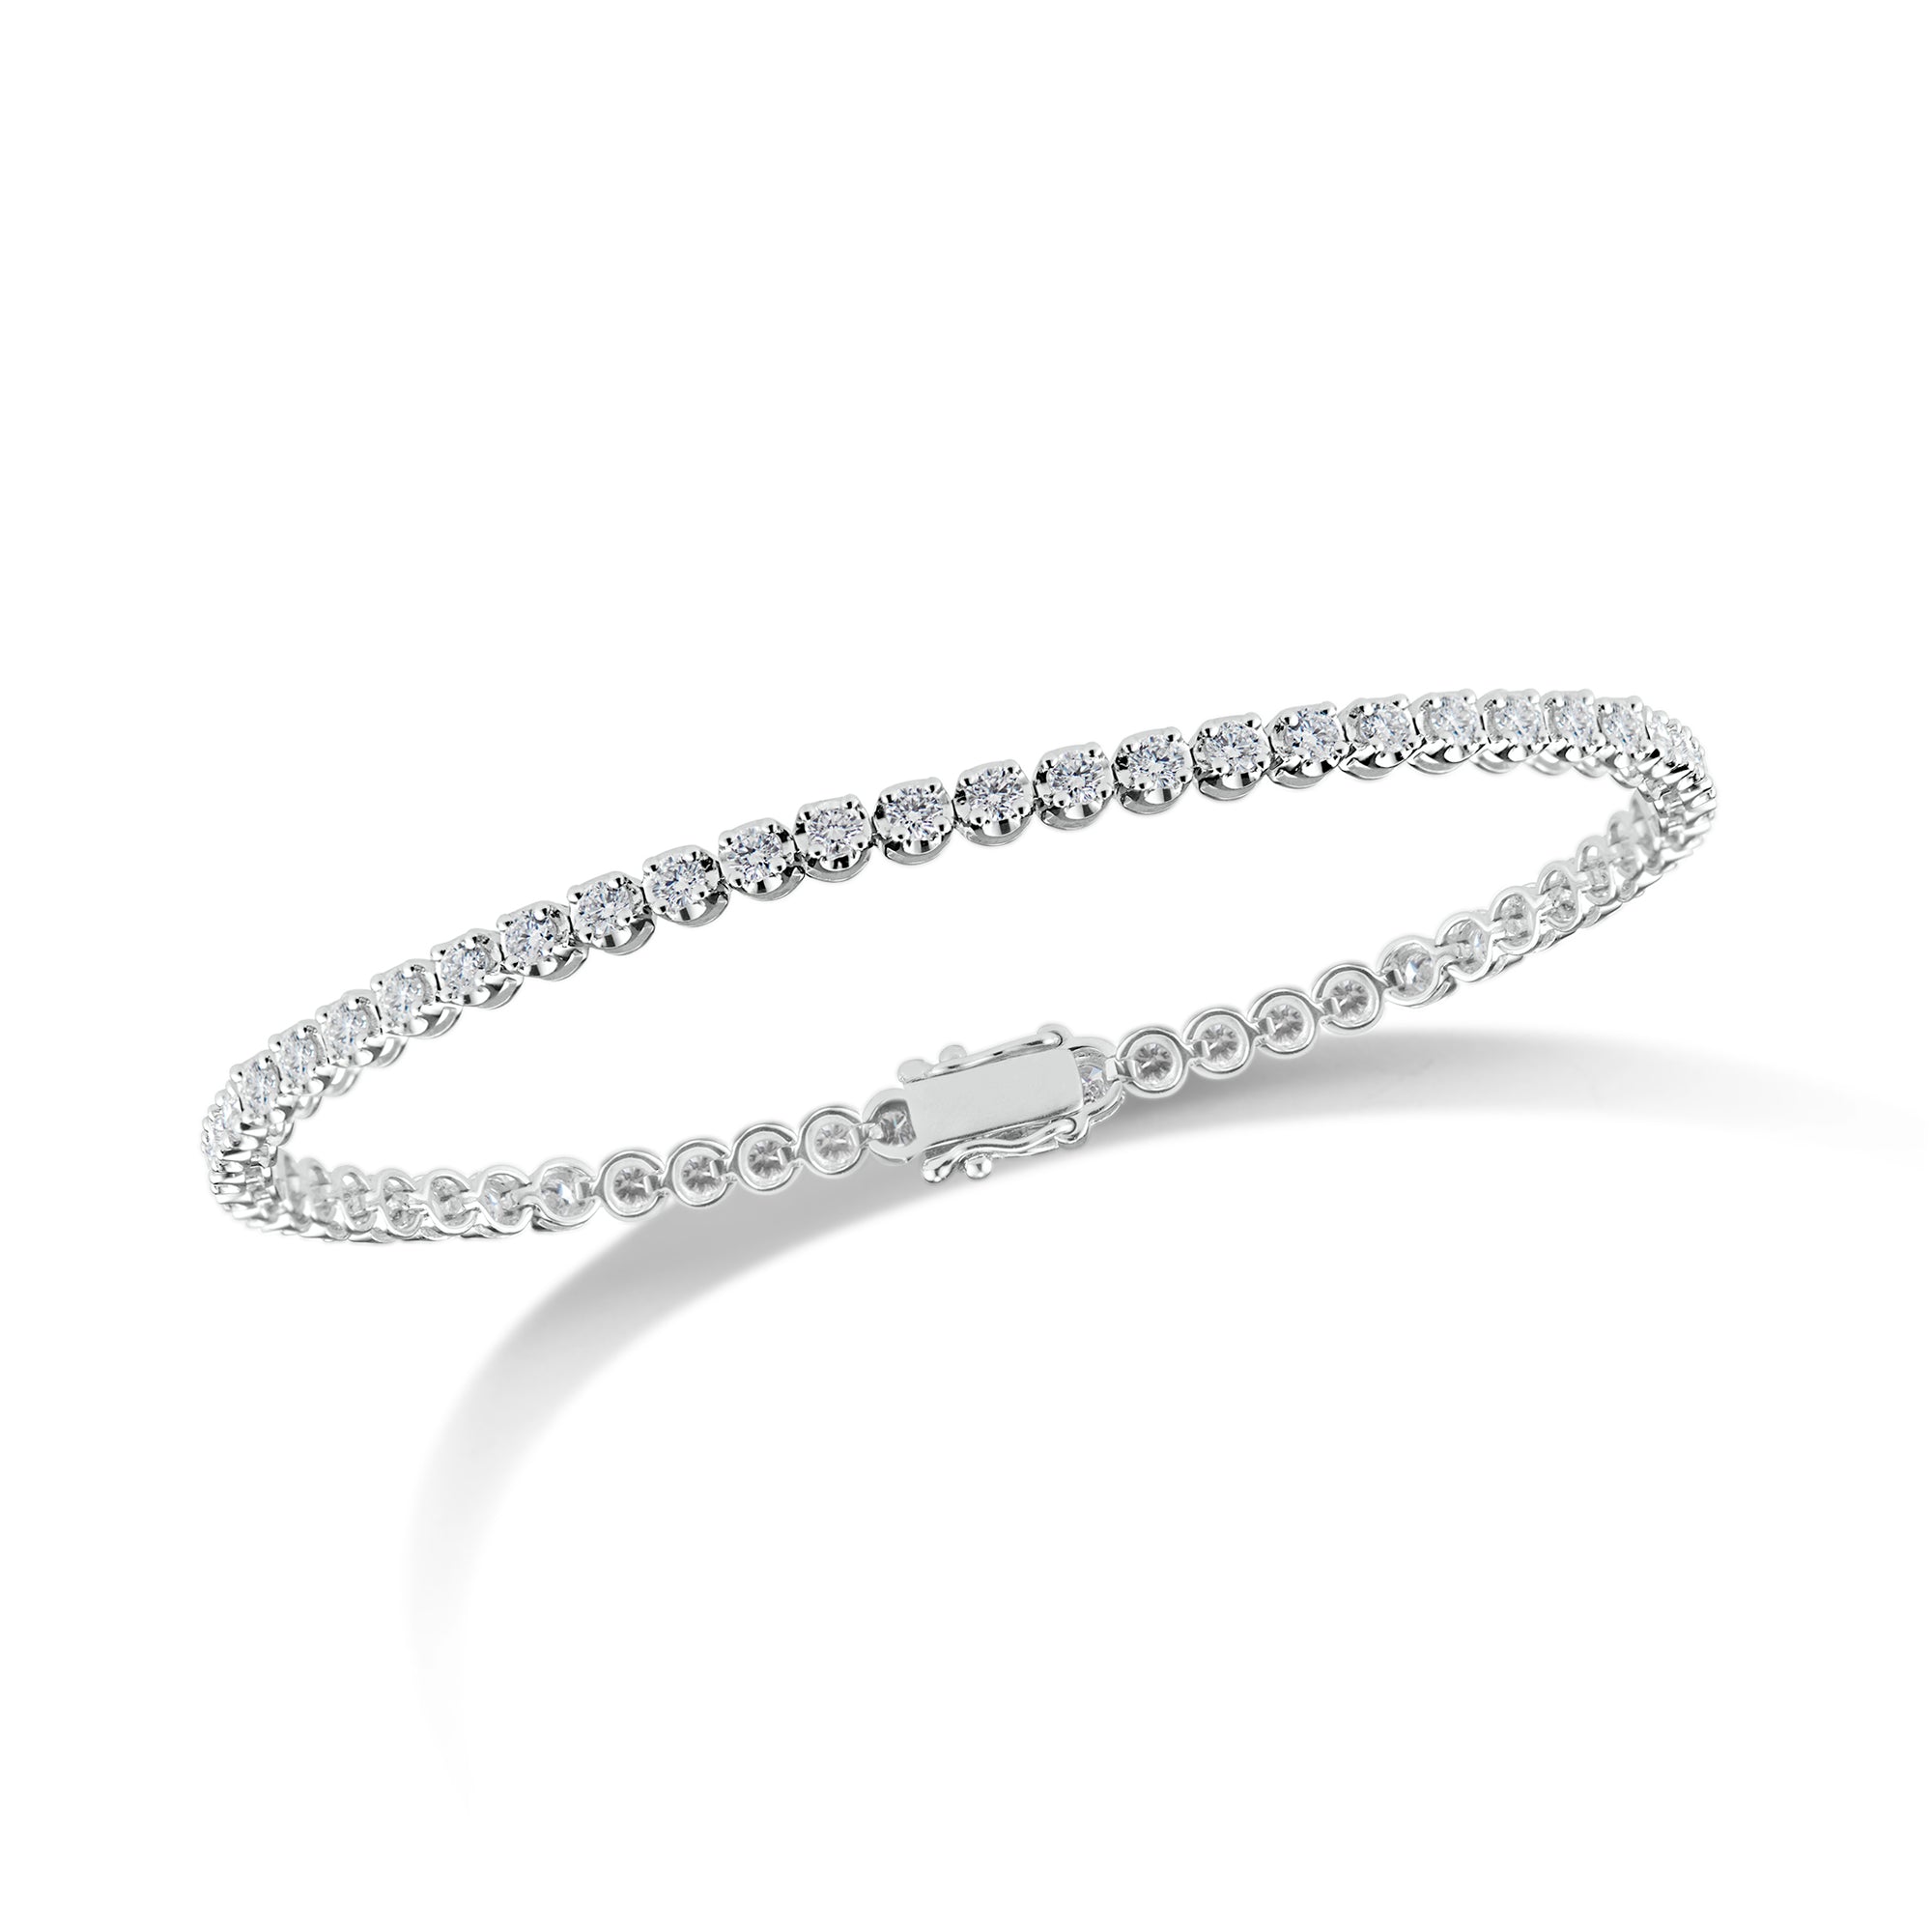 Diamond Small Tennis Bracelet - 14K white gold weighing 5.28 grams - 57 round diamonds totaling 1.98 carats Box clasp closure with safety hooks.